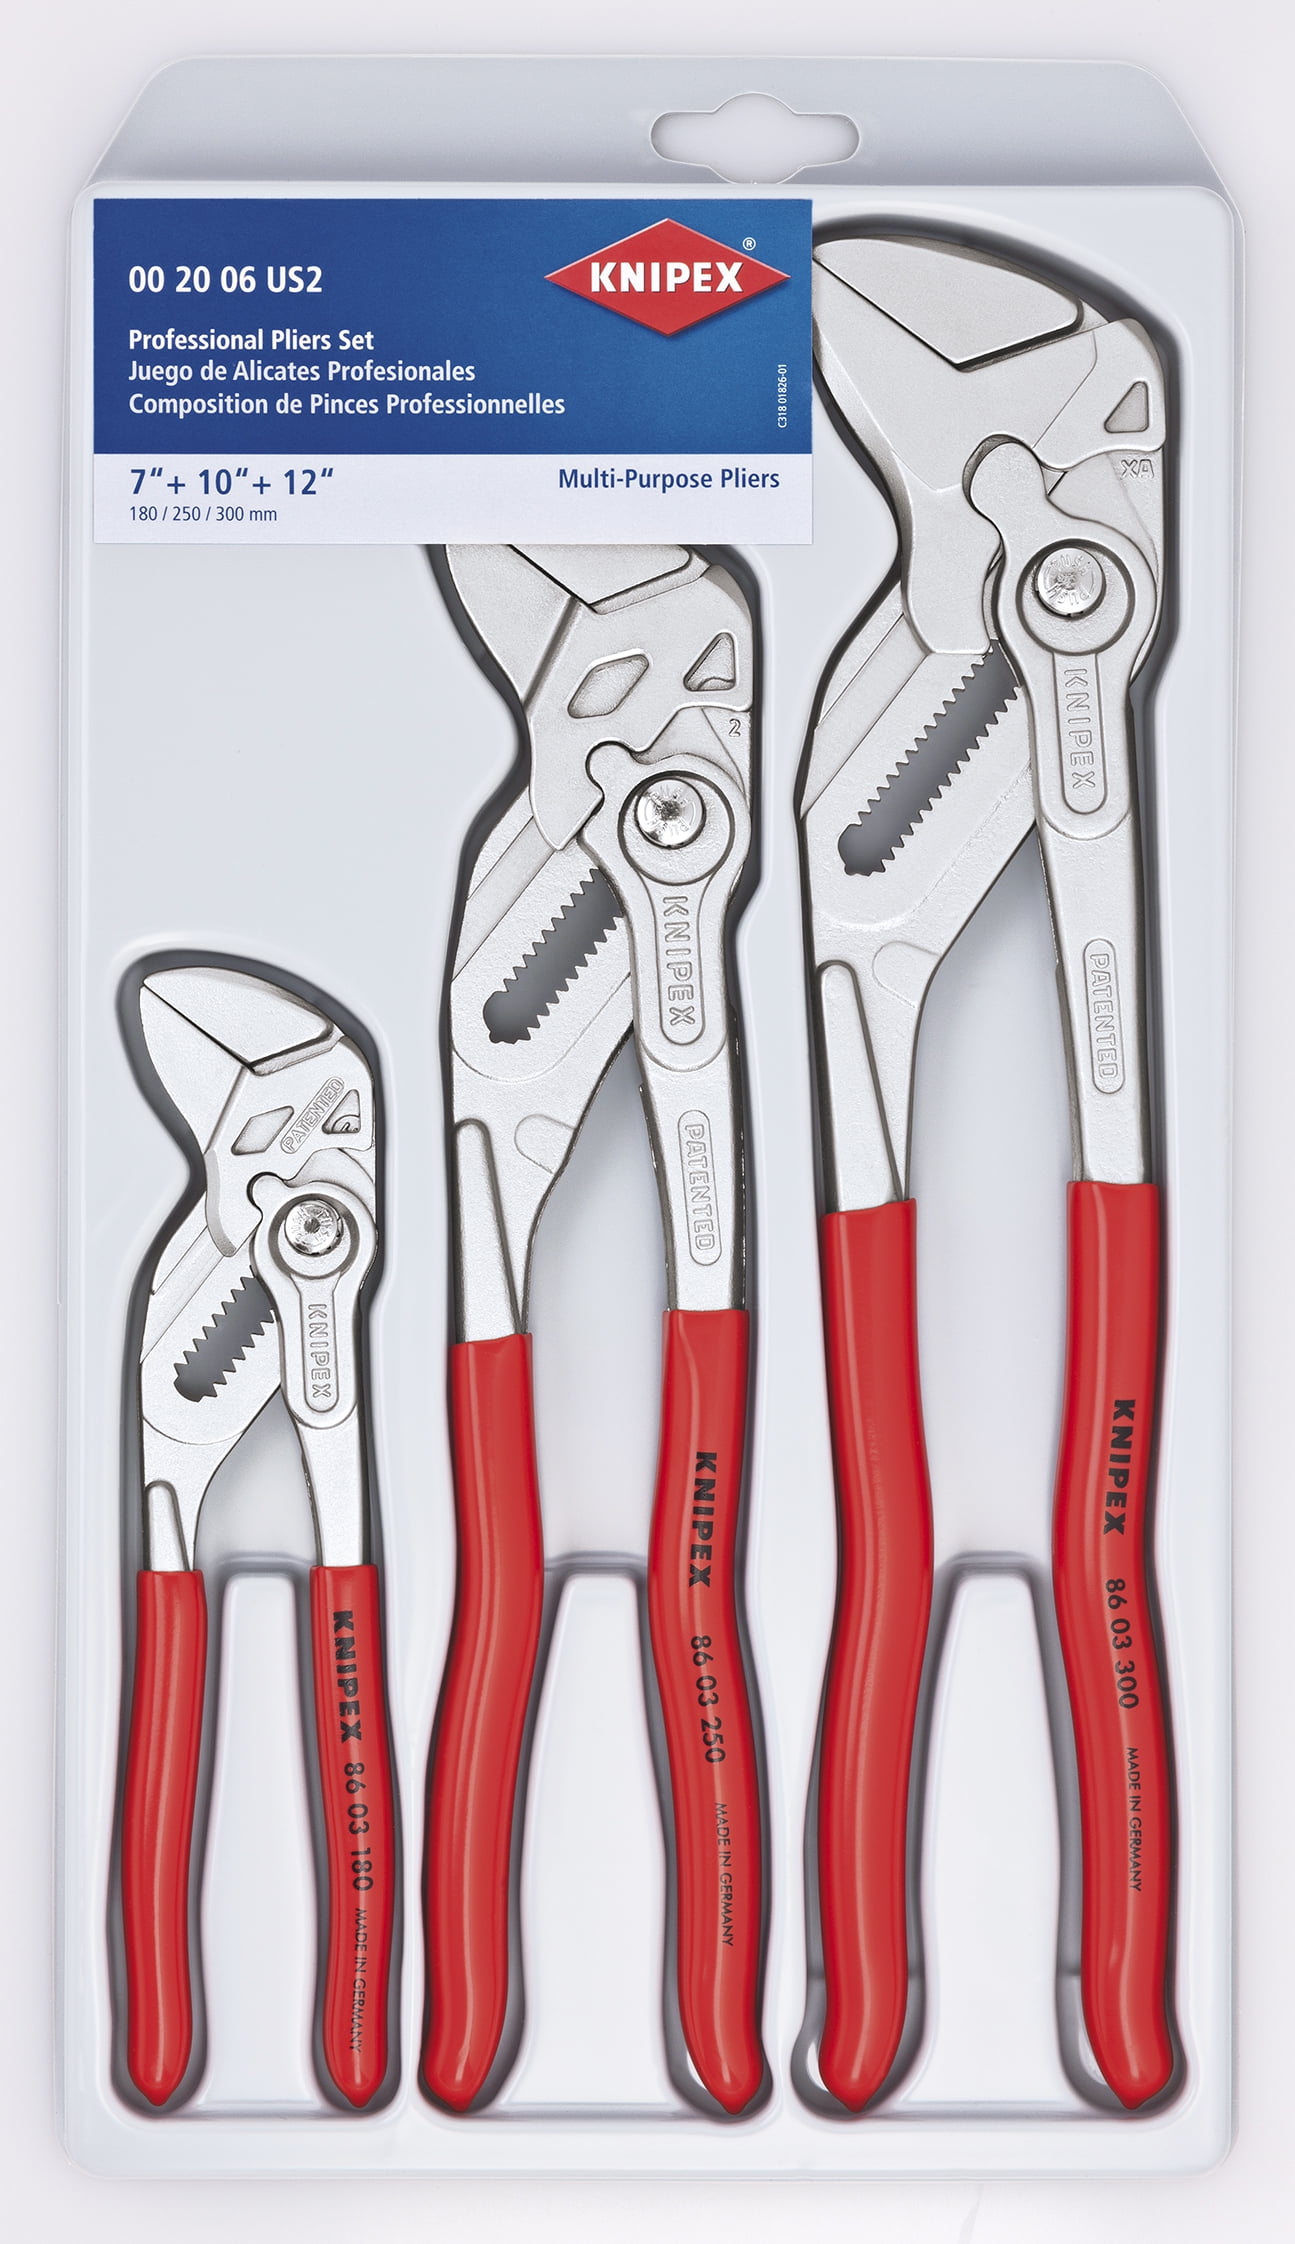 Knipex Tools 00 20 06 US2, Pliers Wrench 7.25, 10, 12-Inch Set, 3-Piece - Walmart.com